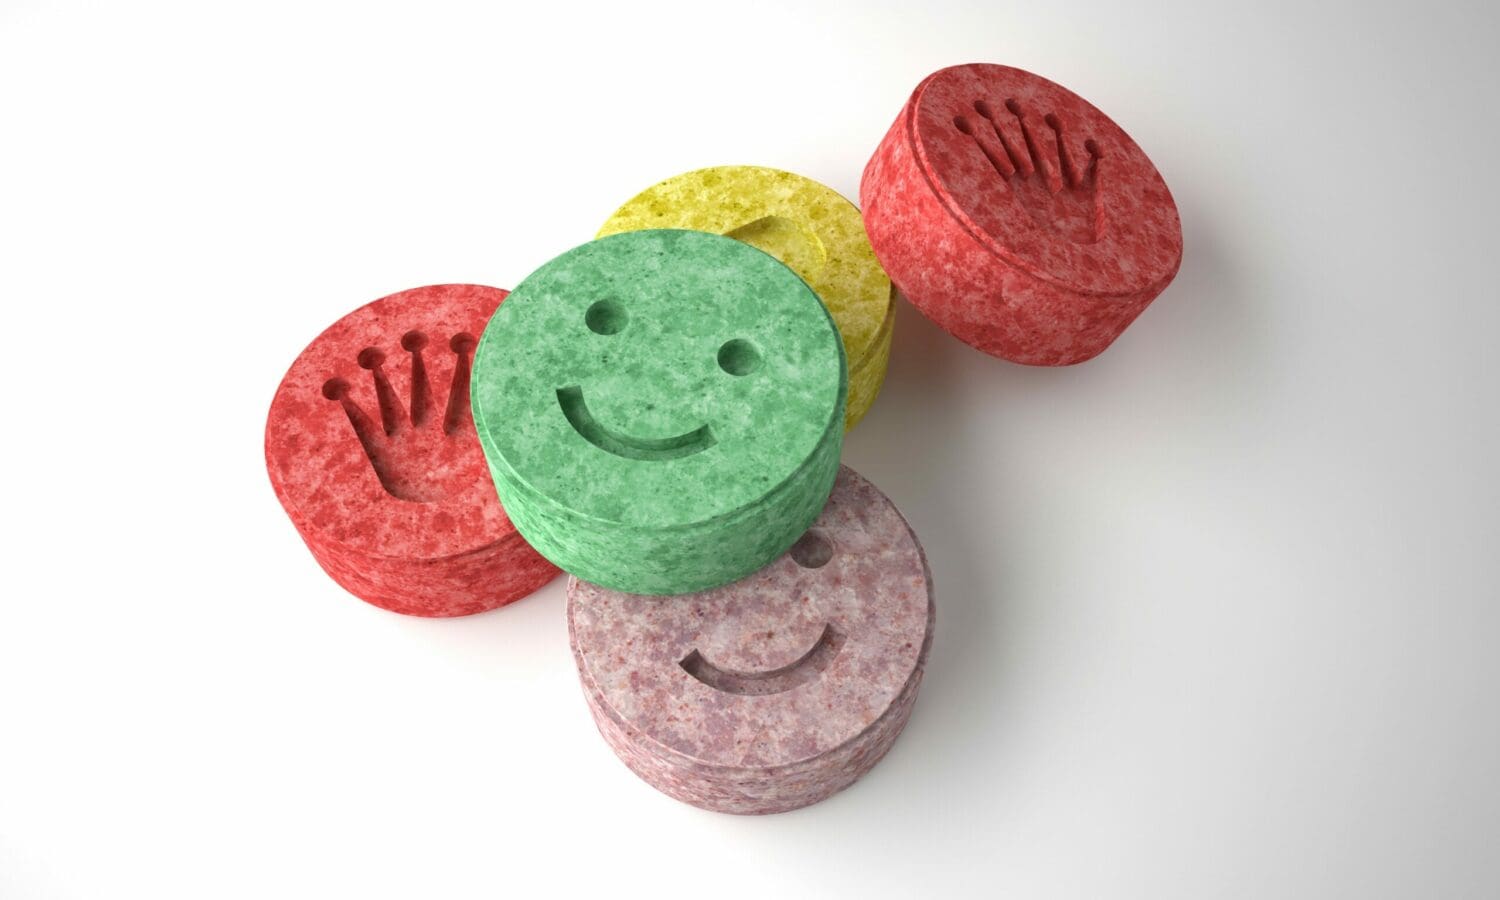 Ecstasy and the effects on the body